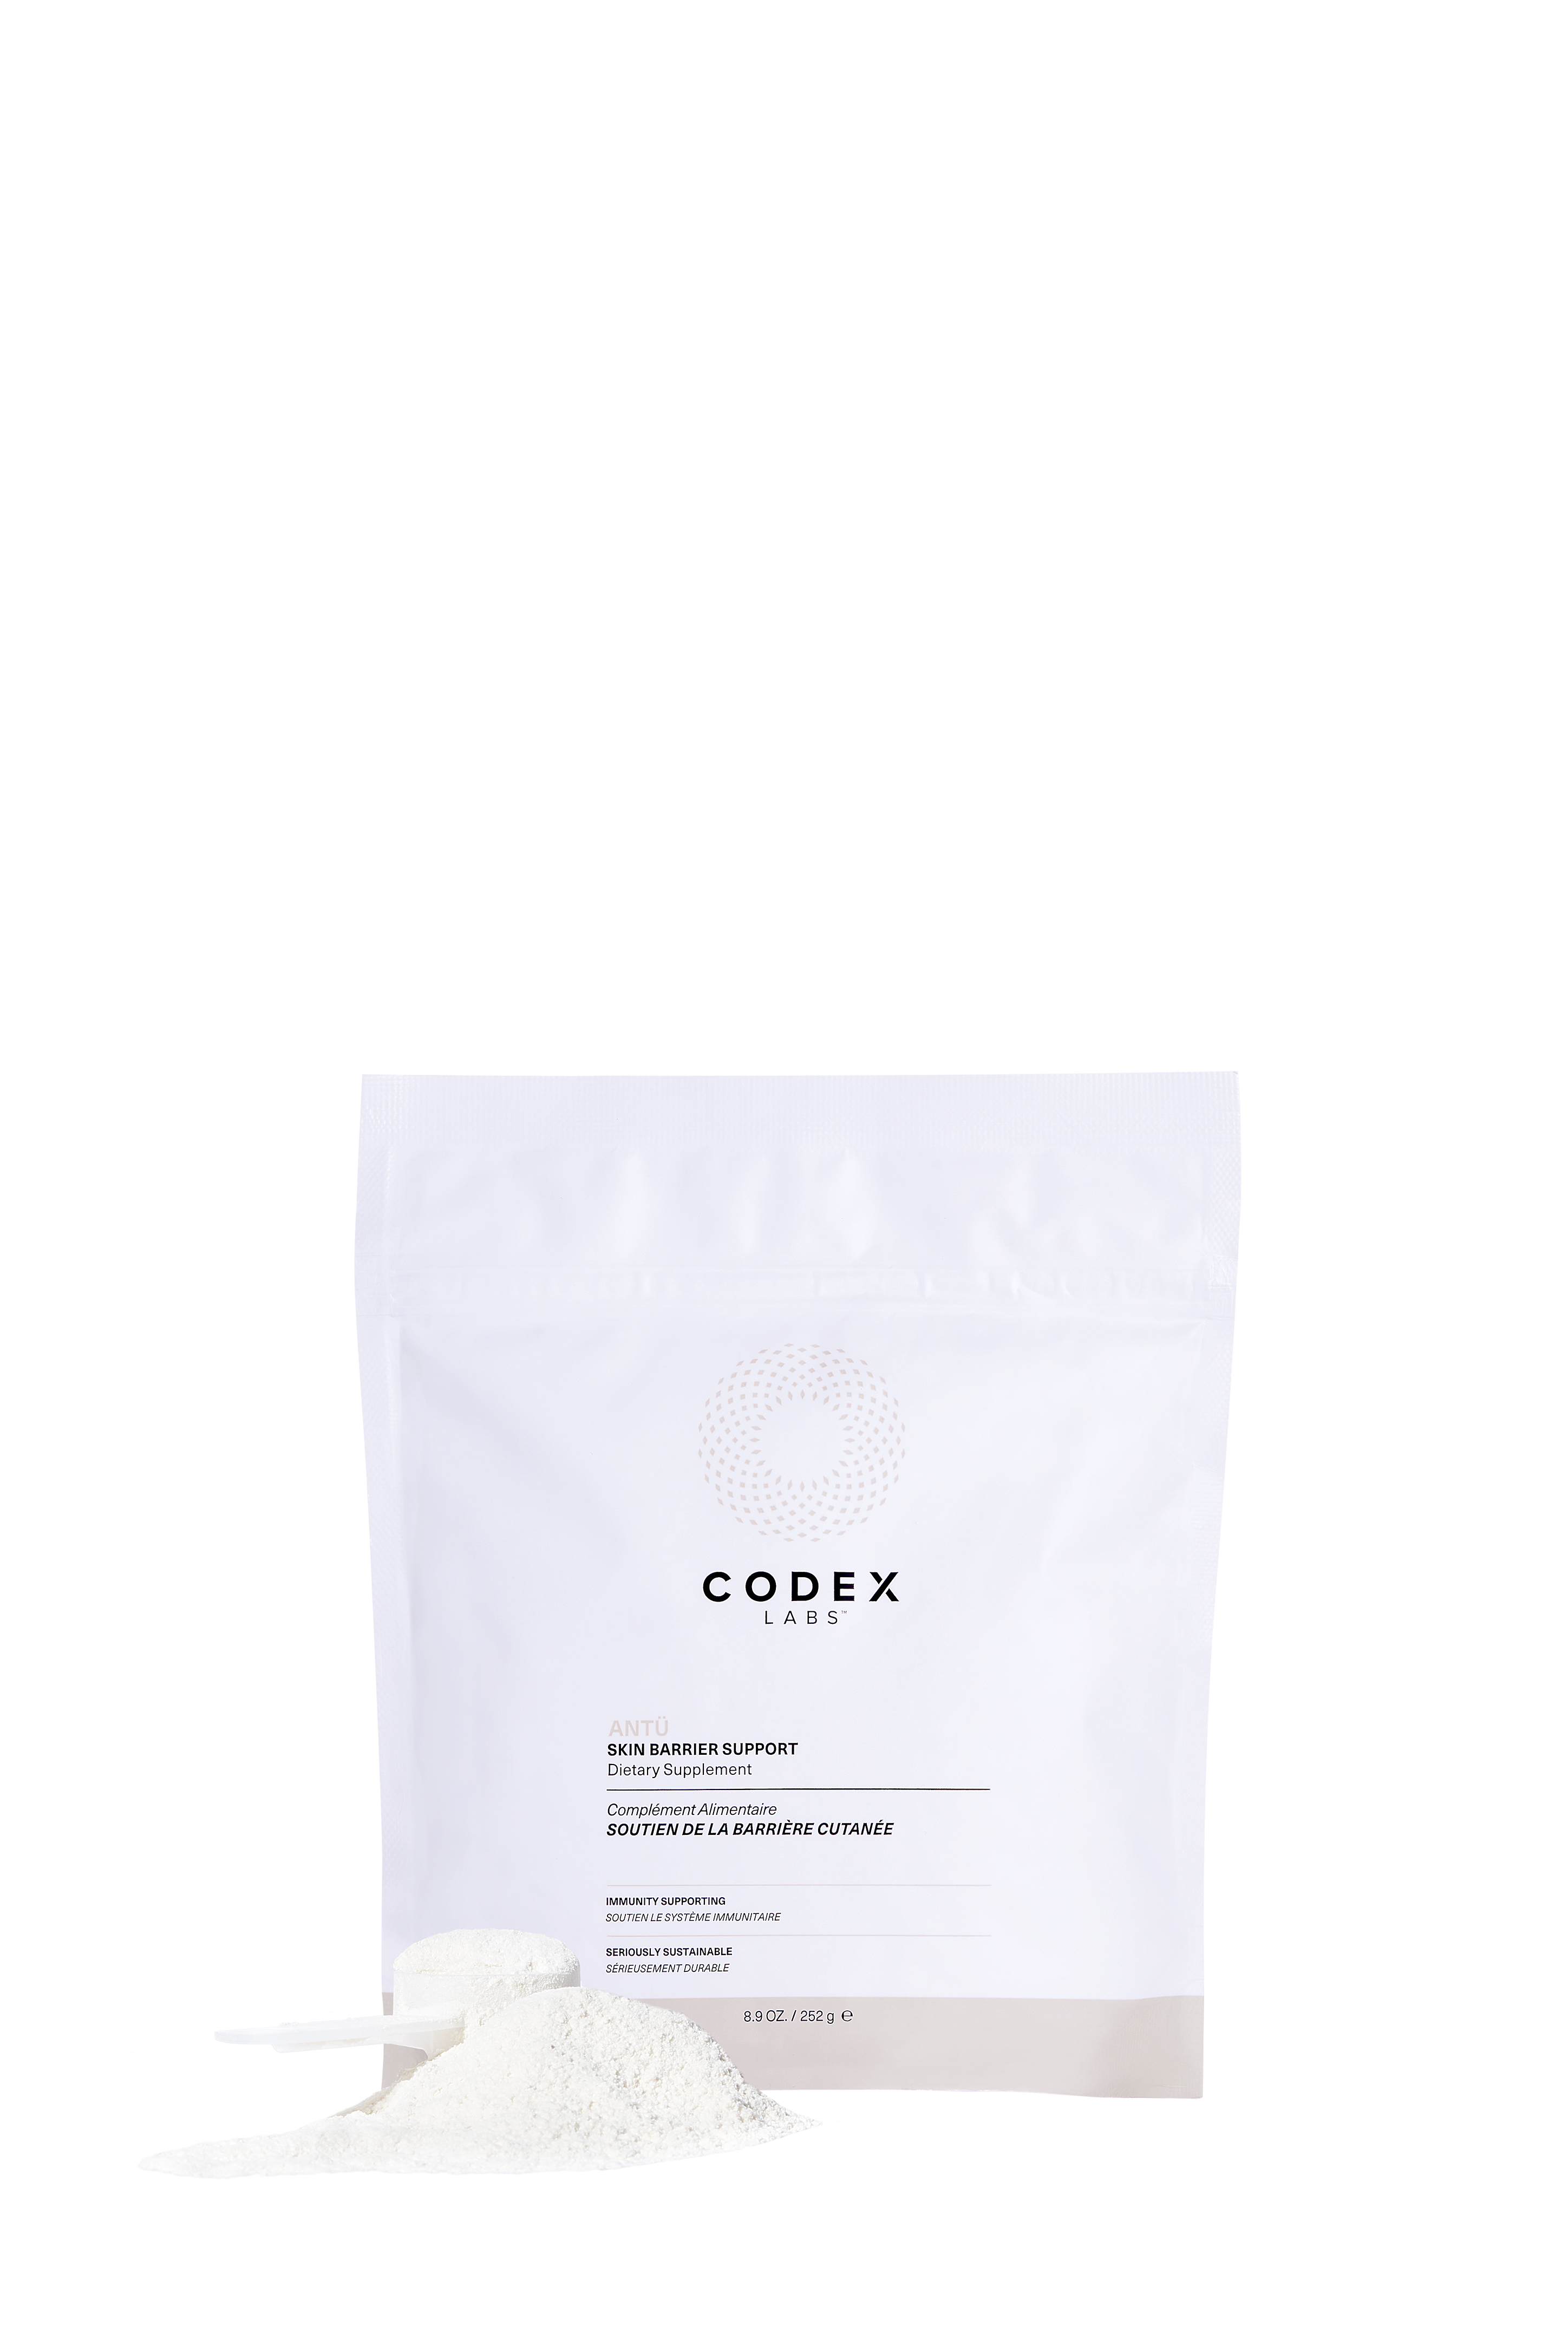 Codex Labs Introduces Antü® Supplement to Support Skin Barrier Health